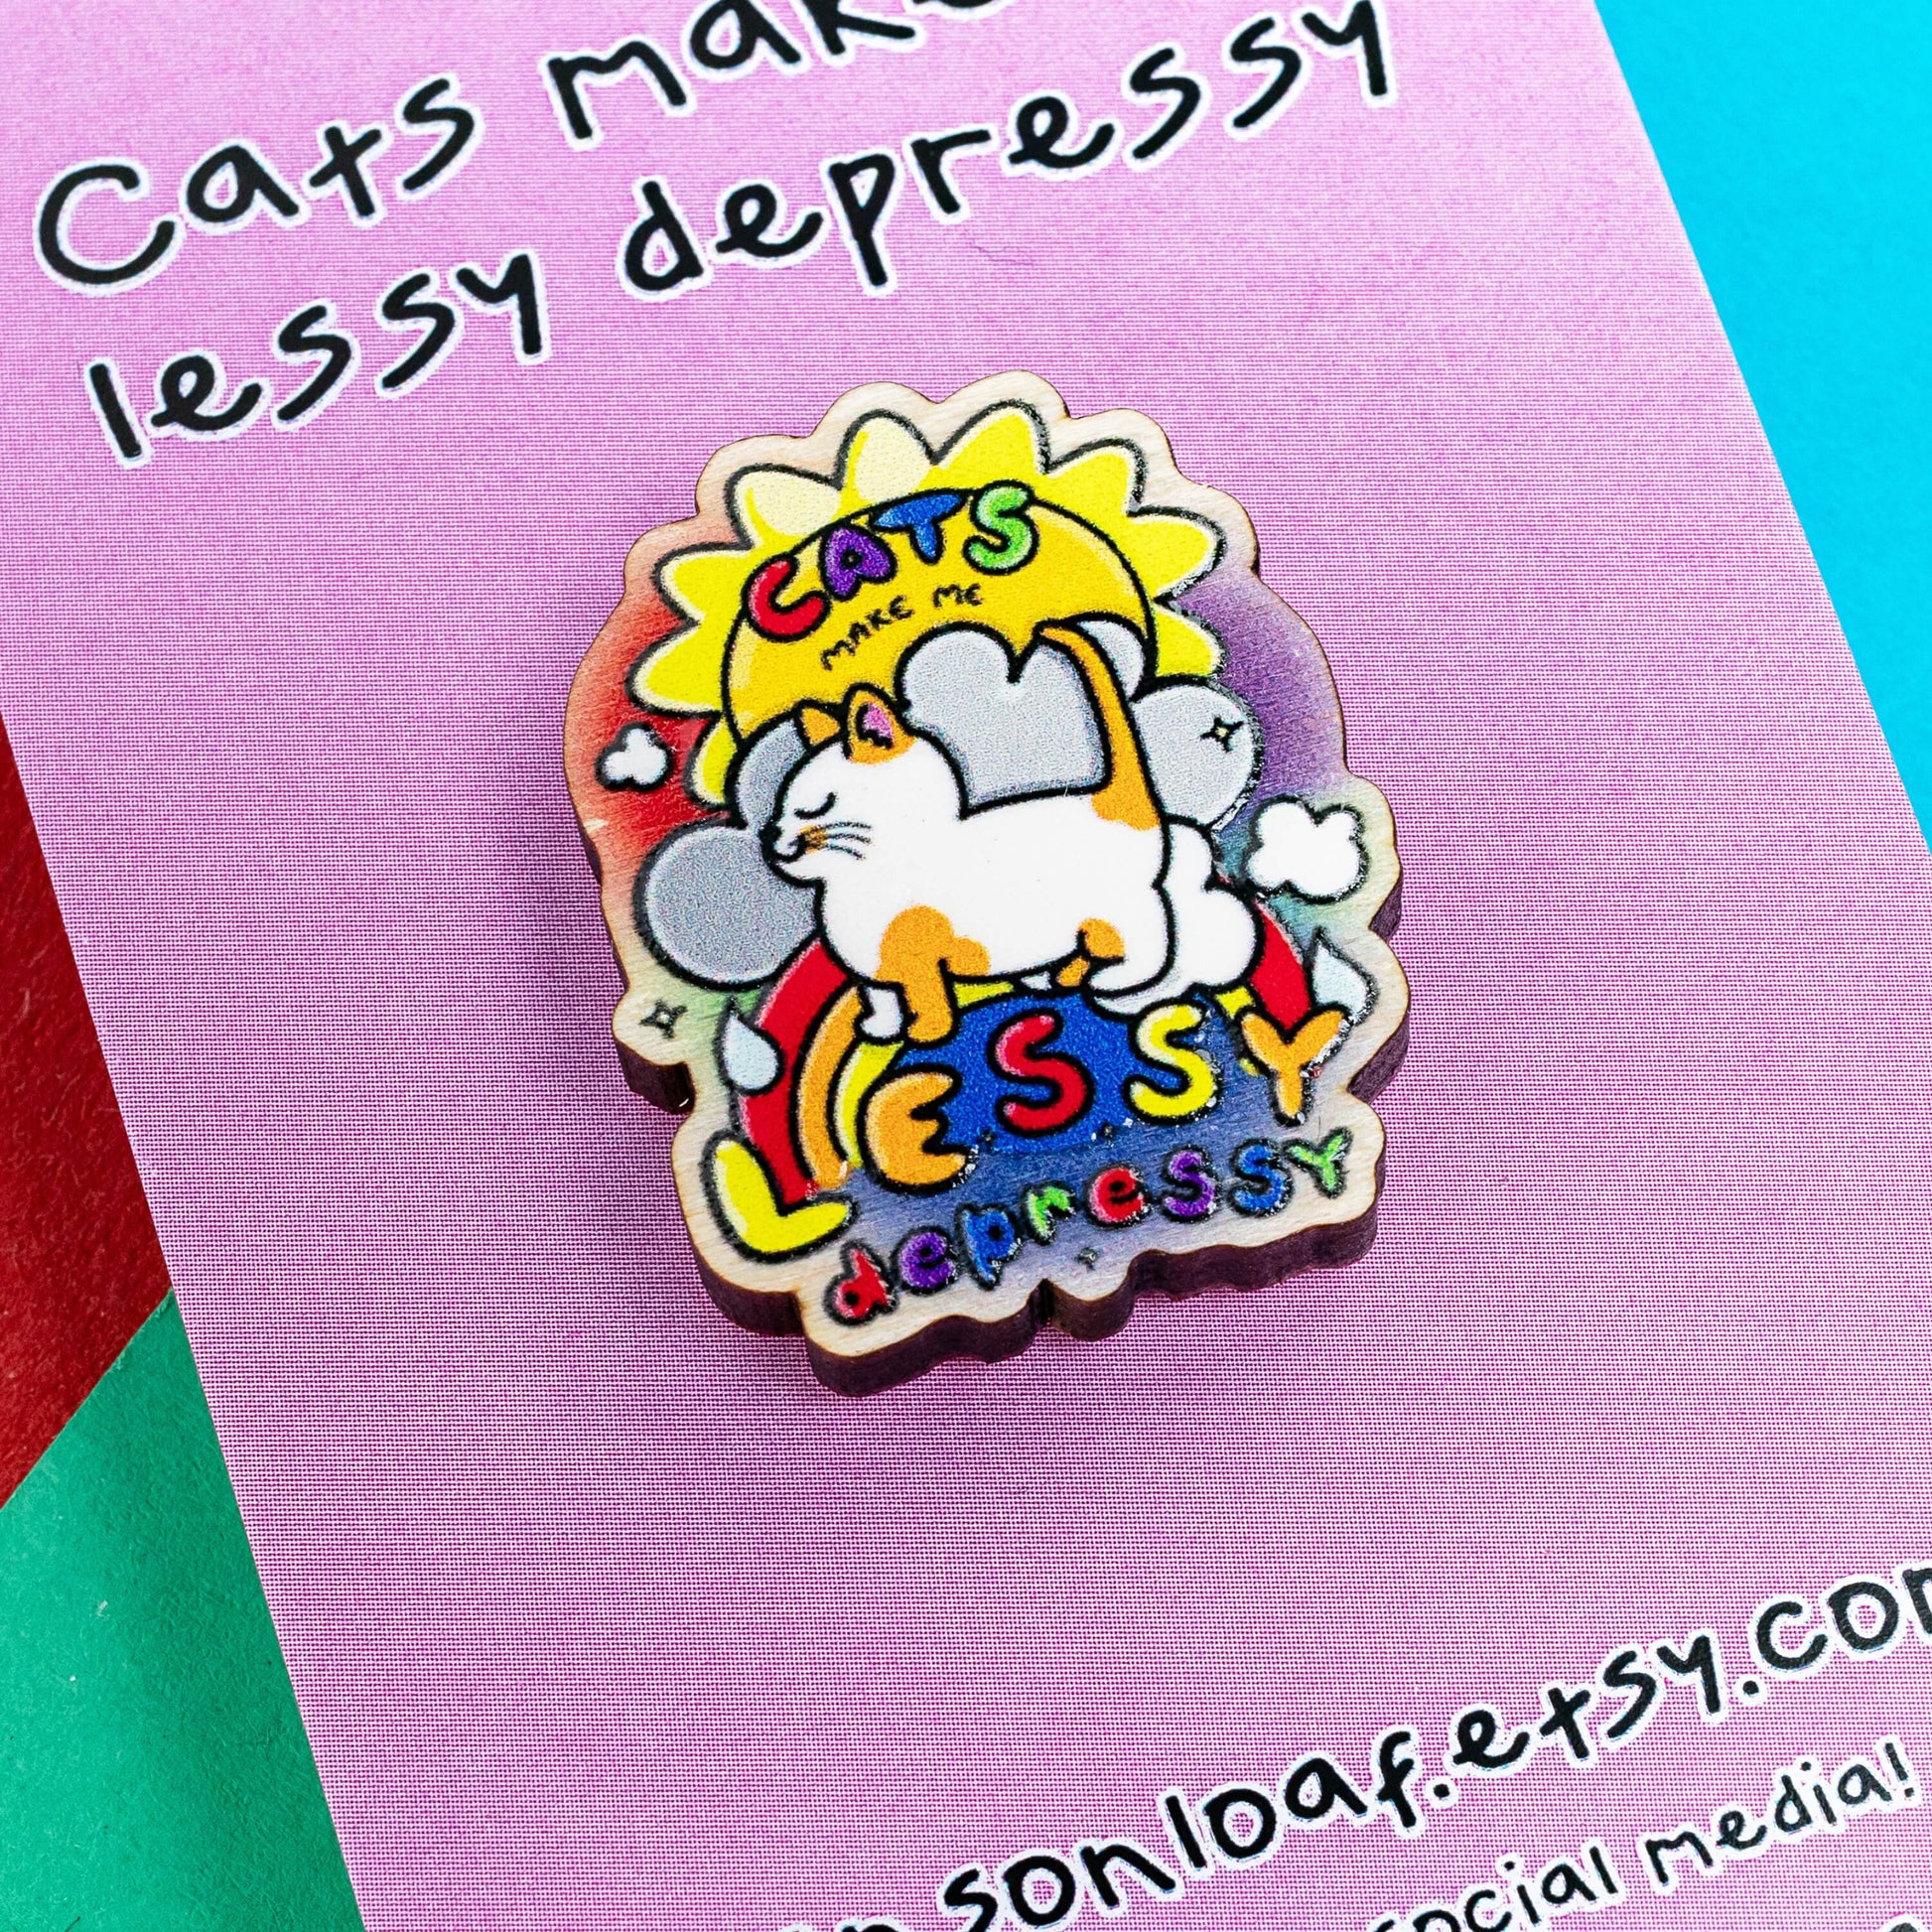 Close up of the Cats Make Me Lessy Depressy Wooden Pin Badge on pink backing card laying on a red, blue and green card background. The wooden pin features a smiling orange and white cat with a sunshine, raincloud and rainbow, in rainbow text across this reads 'cats make me lessy depressy'. Hand drawn design to raise awareness for mental health and depression.